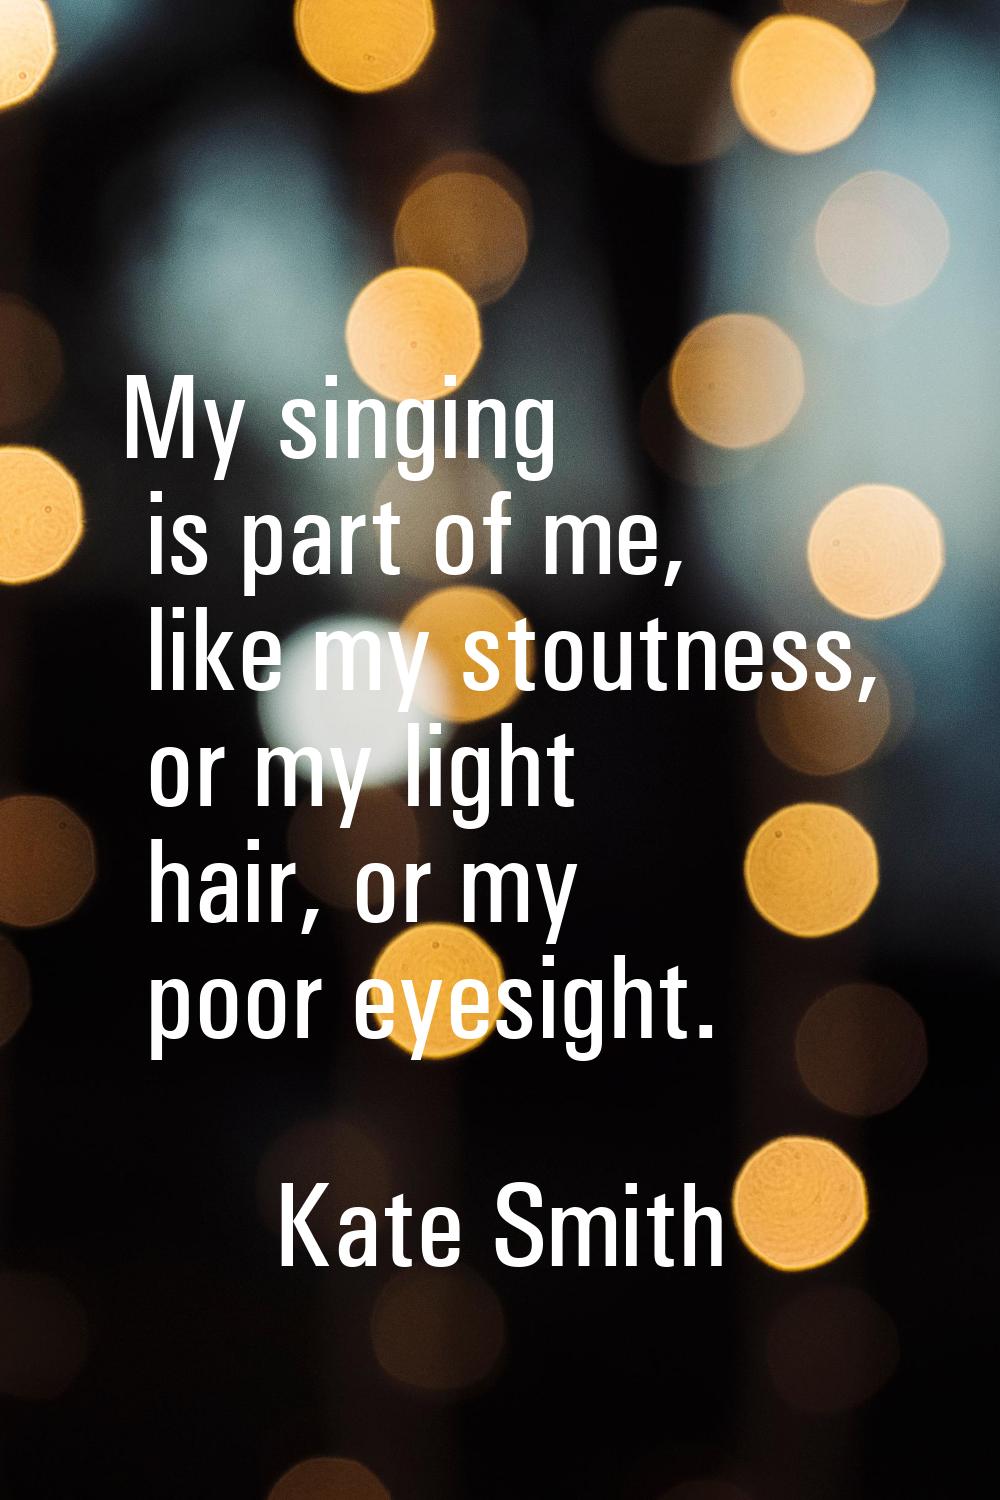 My singing is part of me, like my stoutness, or my light hair, or my poor eyesight.